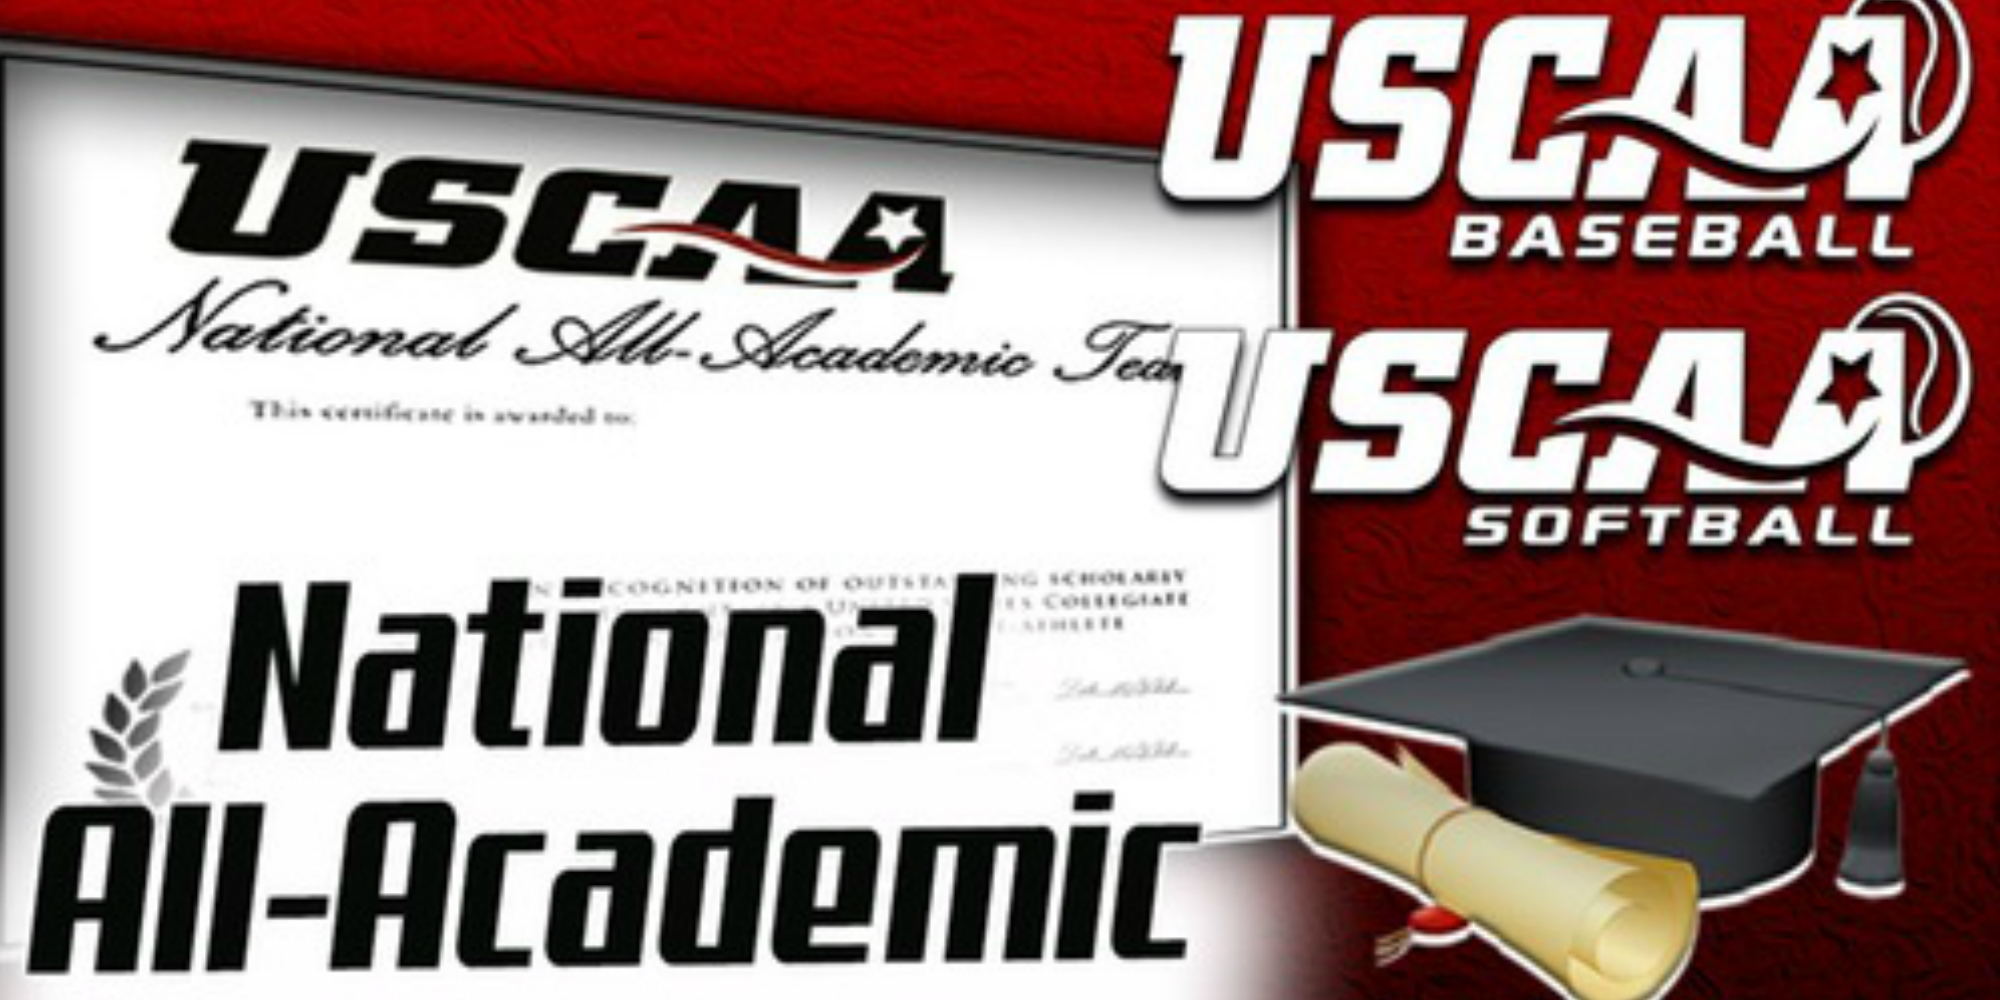 Hovde, J. Griesbauer, Goehring, and Lazarek Named to USCAA National All-Academic Teams